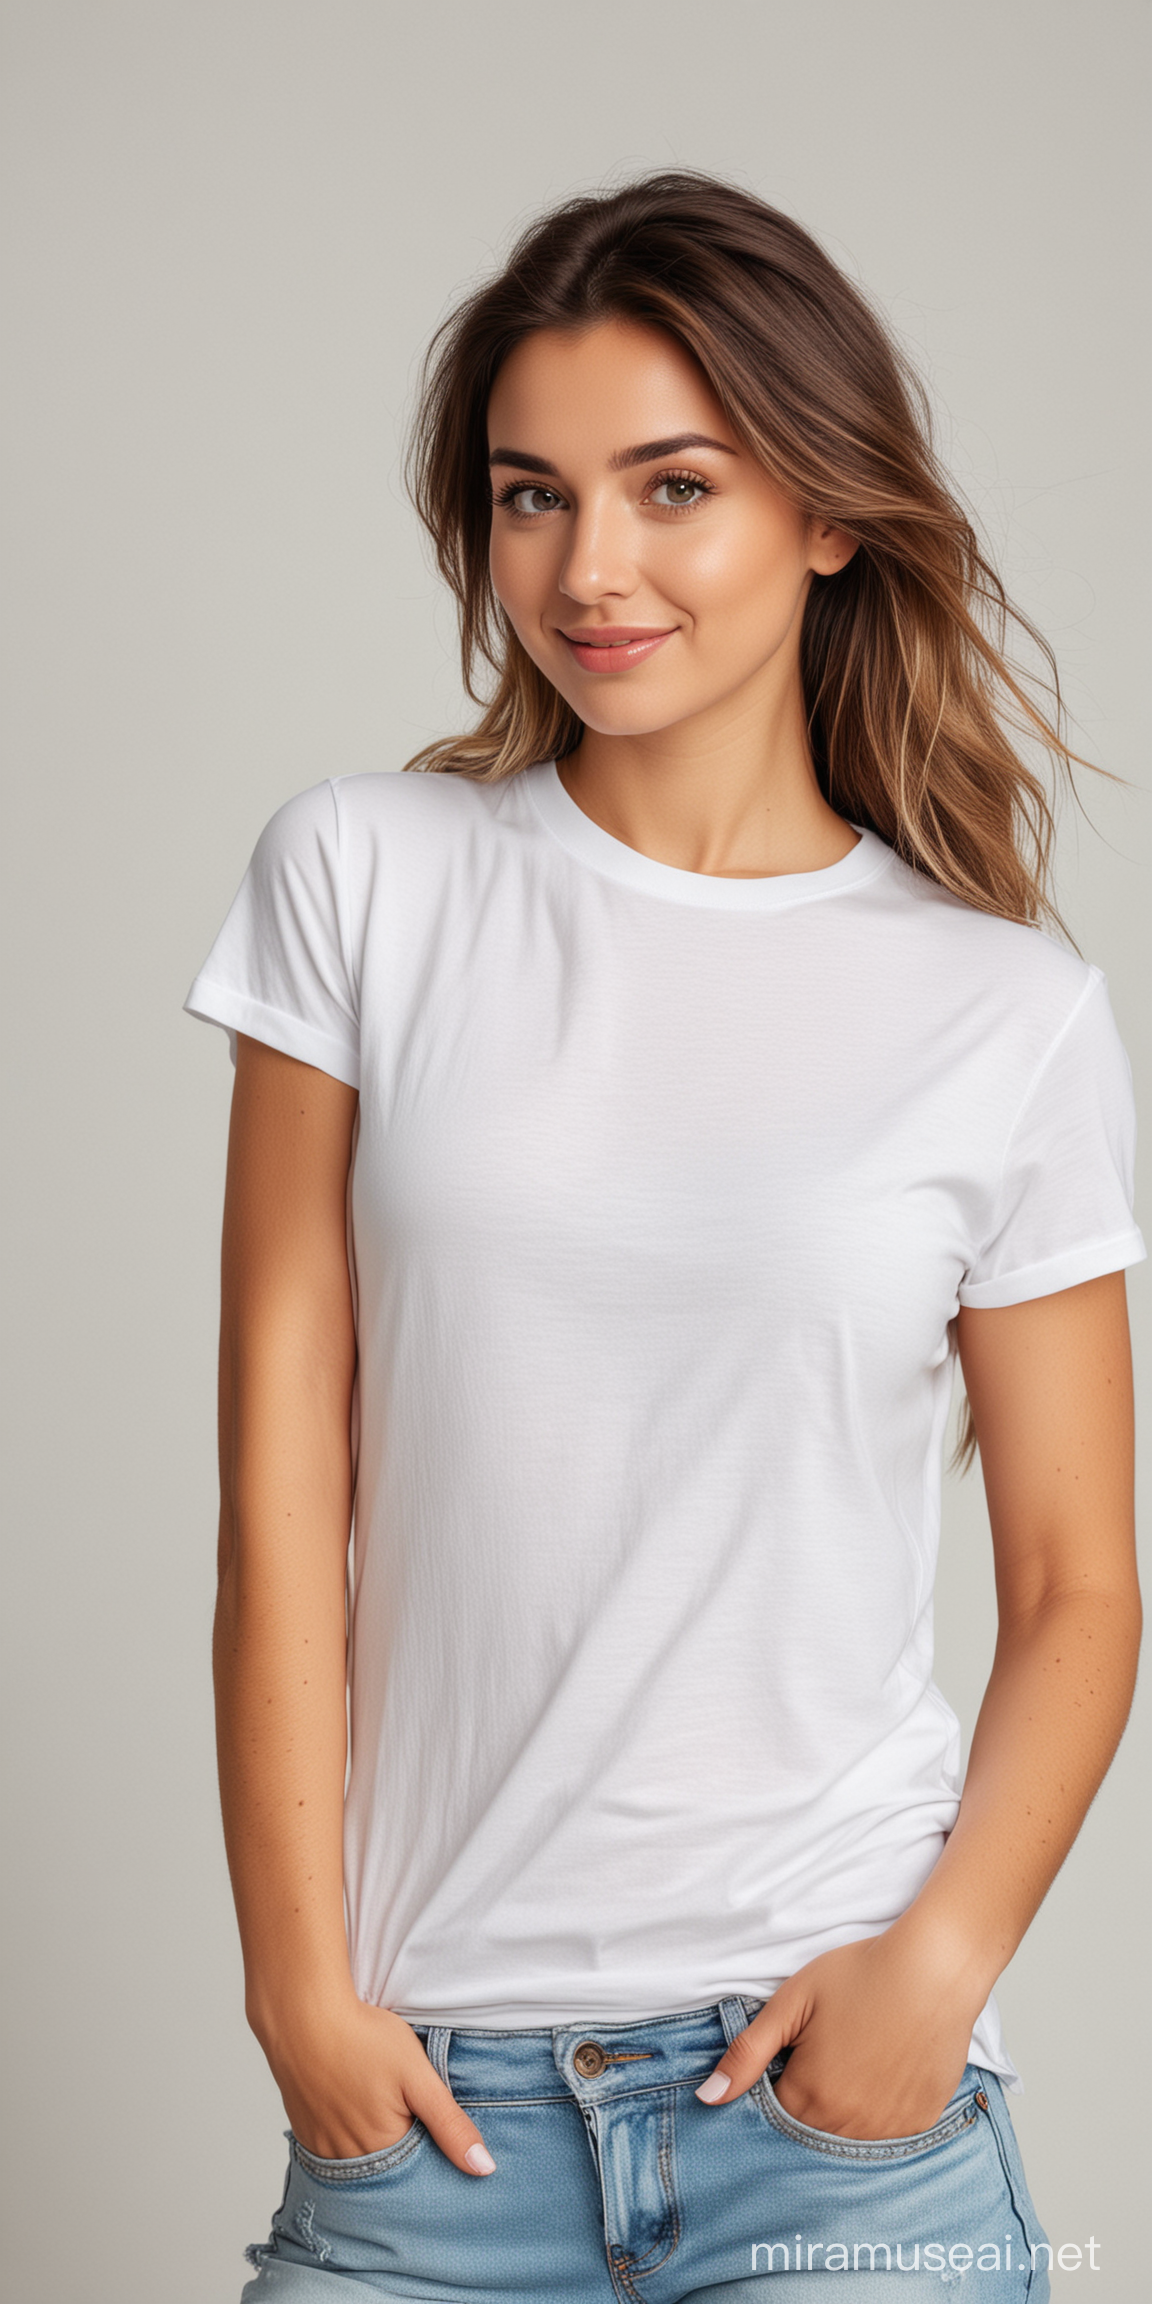 Cheerful Woman in White TShirt Smiling